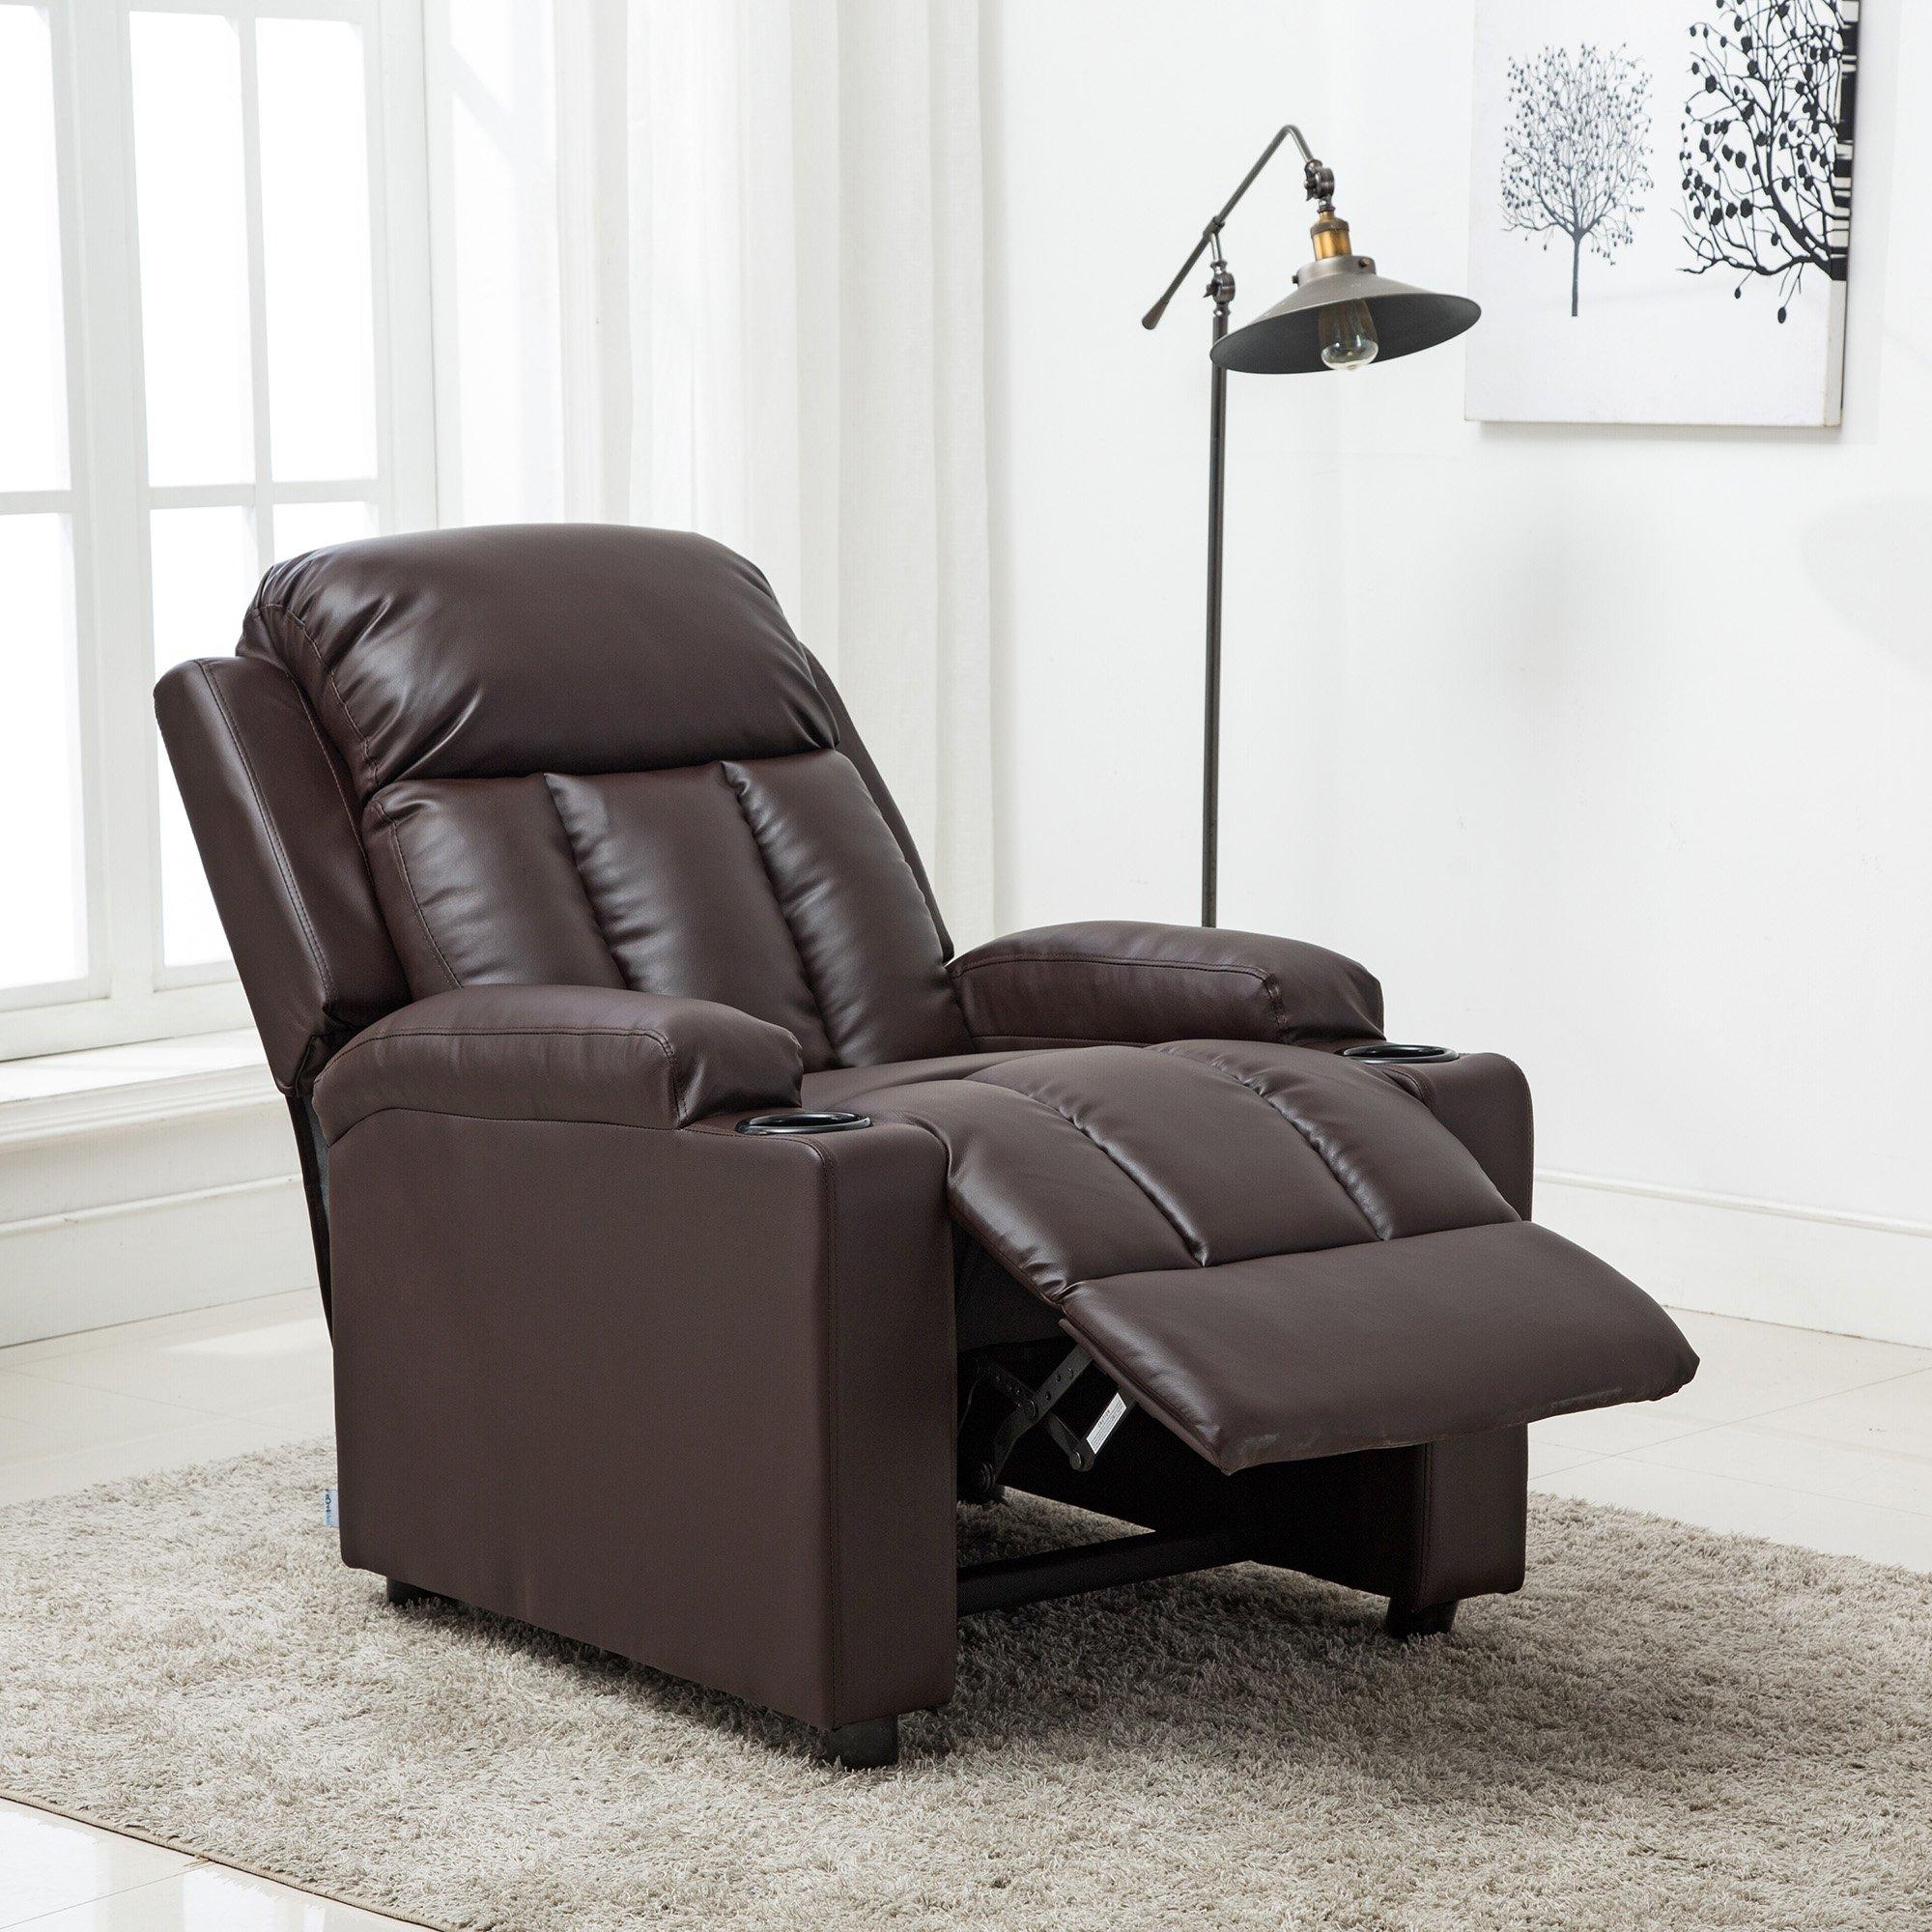 Studio Leather Recliner With Drink Holders Sofa Armchair